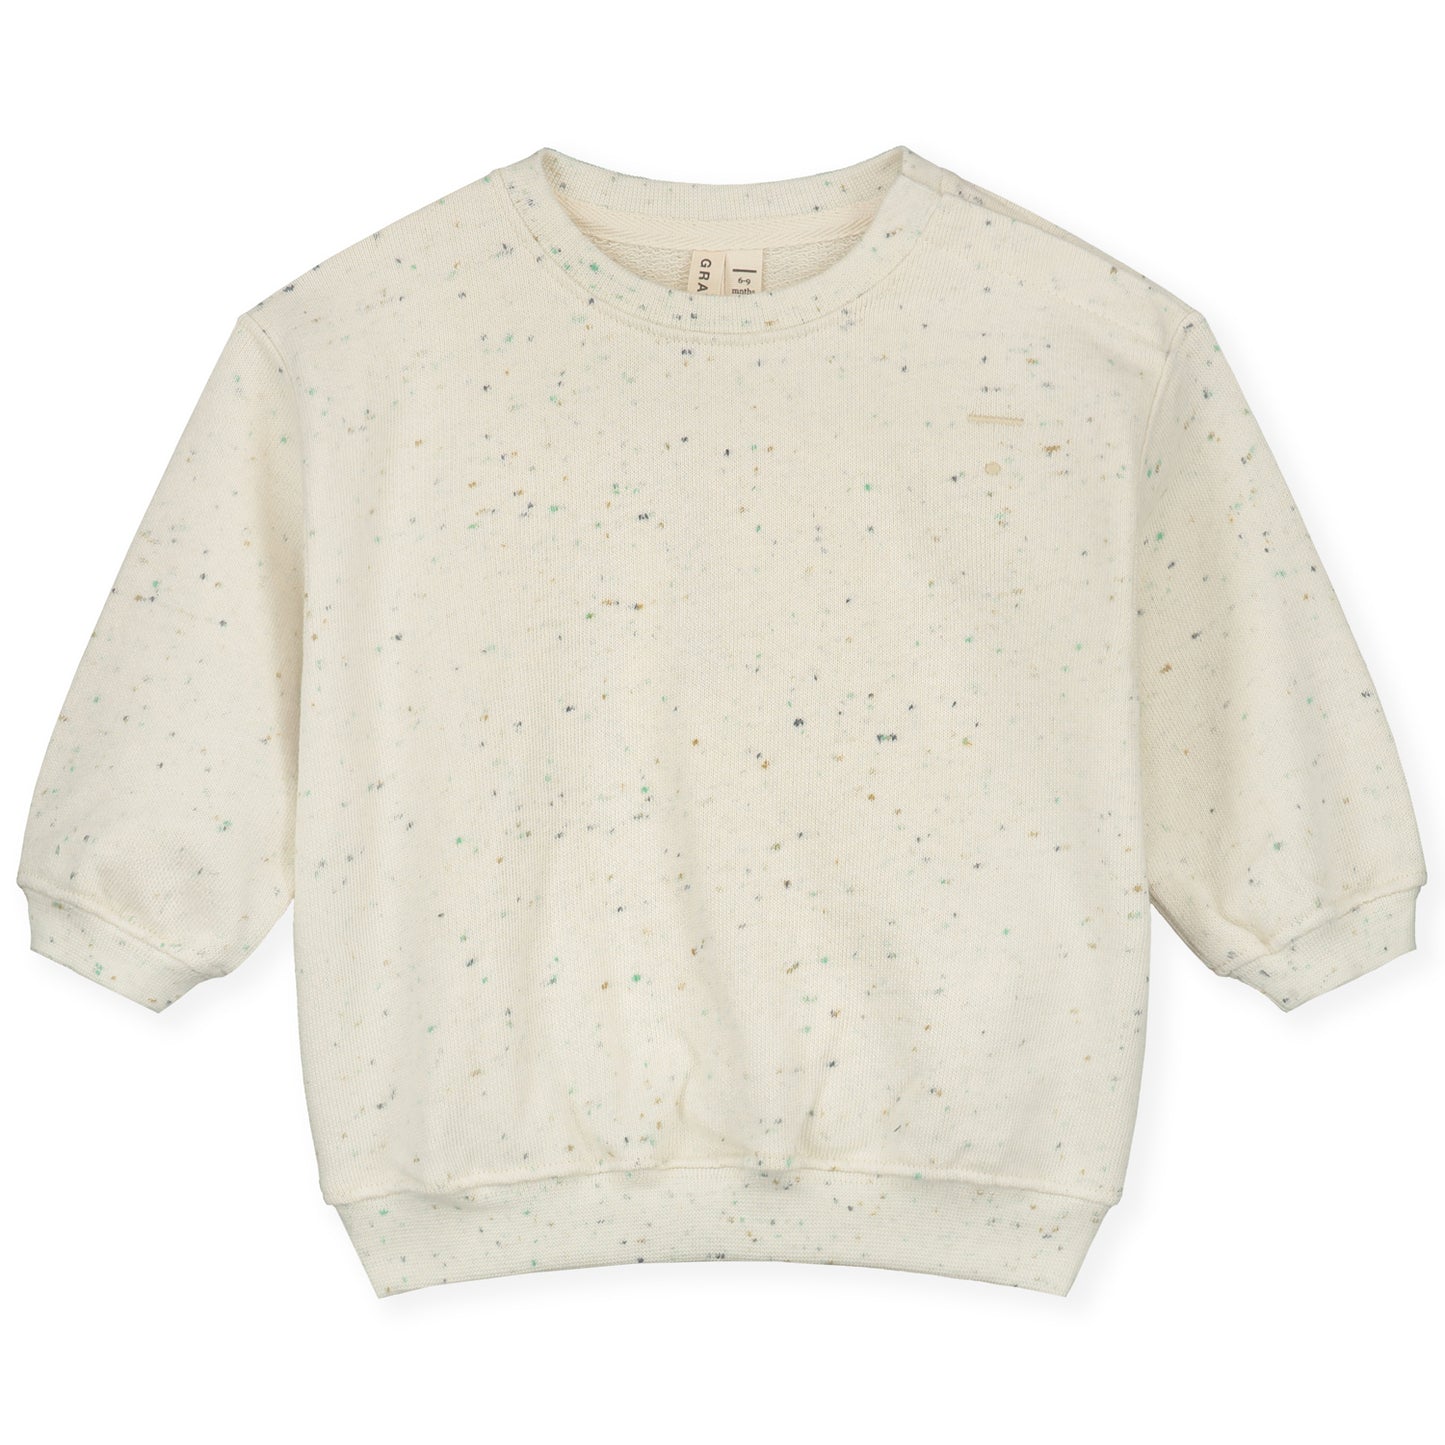 Gray label | Baby Dropped Shoulder
Sweater GOTS |  Sprinkles